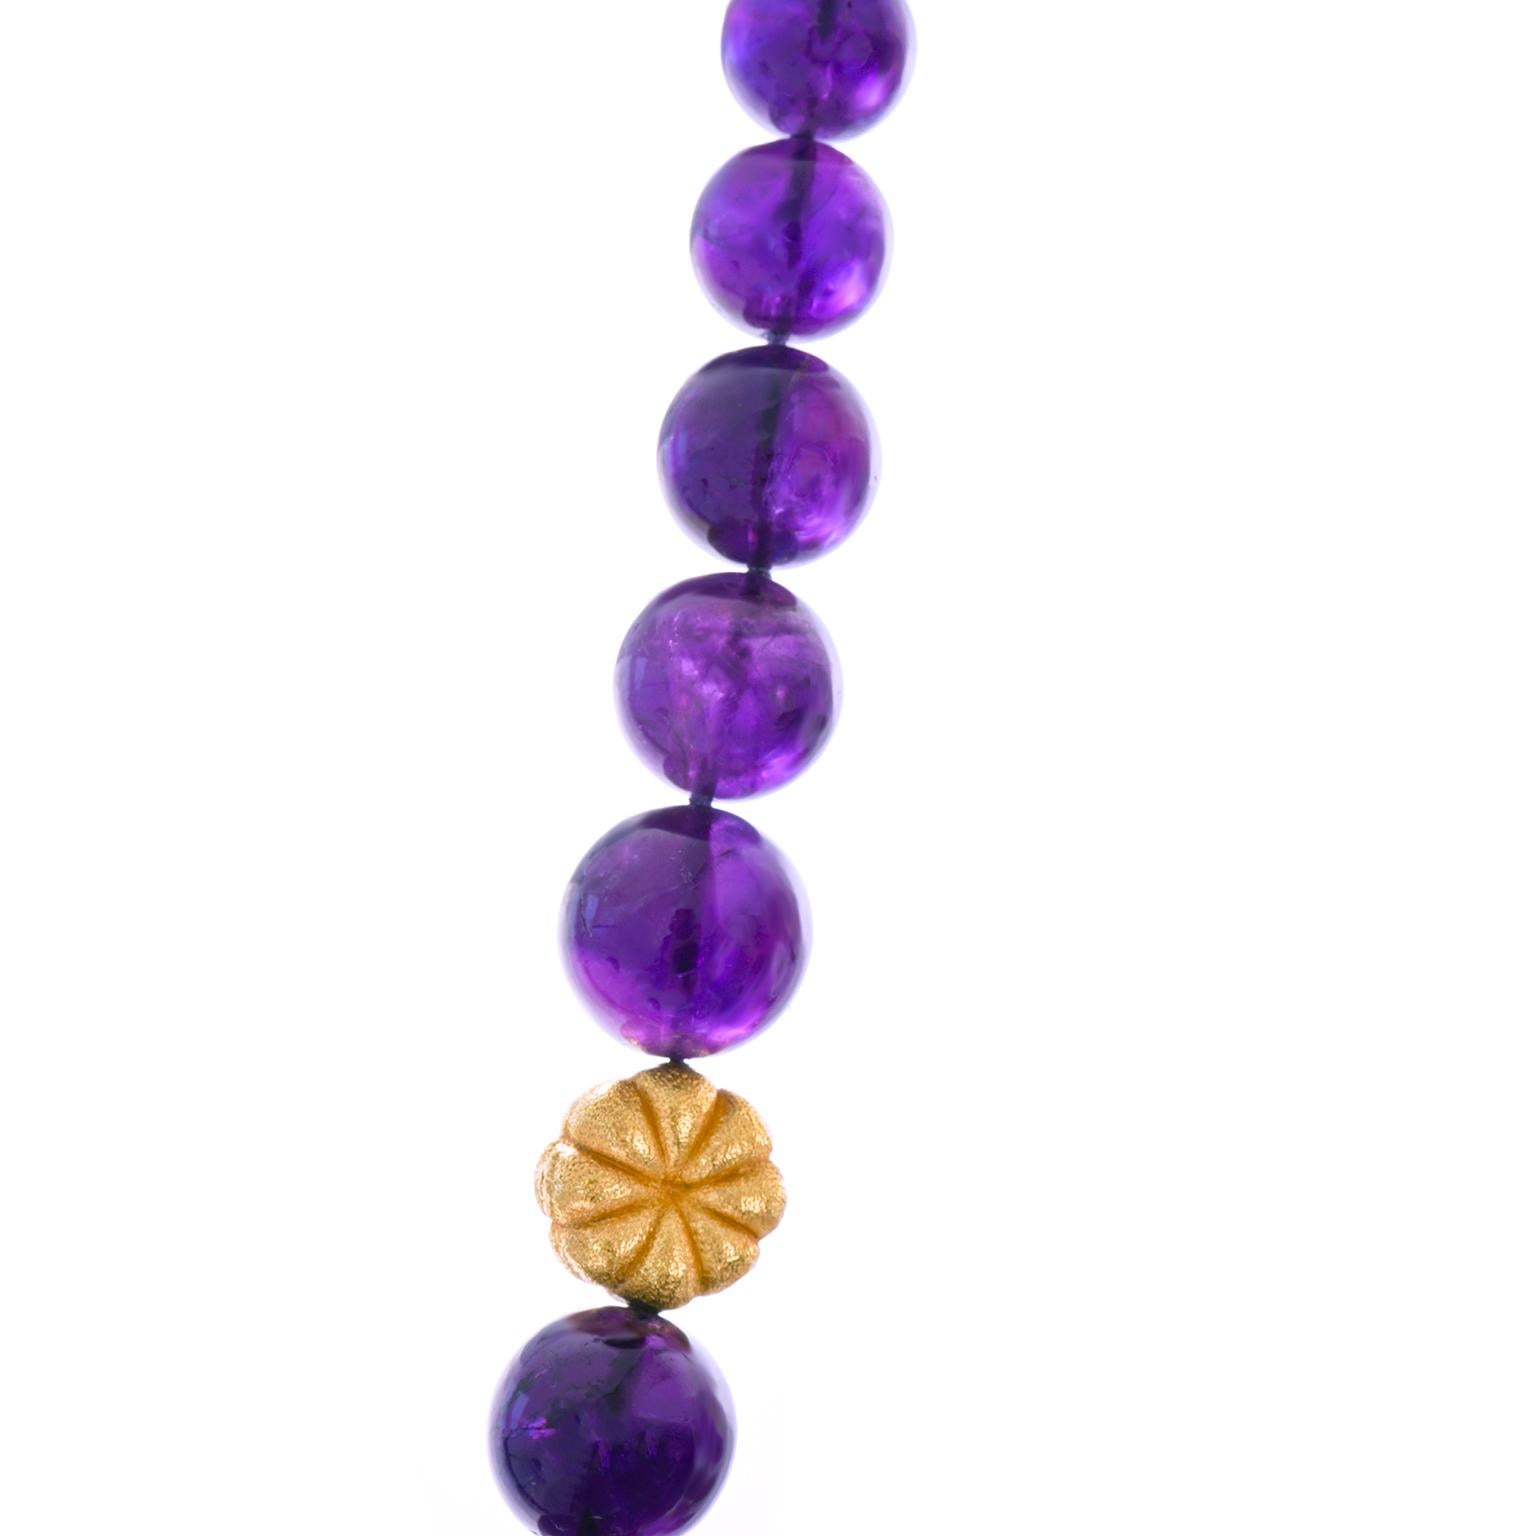 Amethyst and Gold Bead Necklace and Bracelet 1